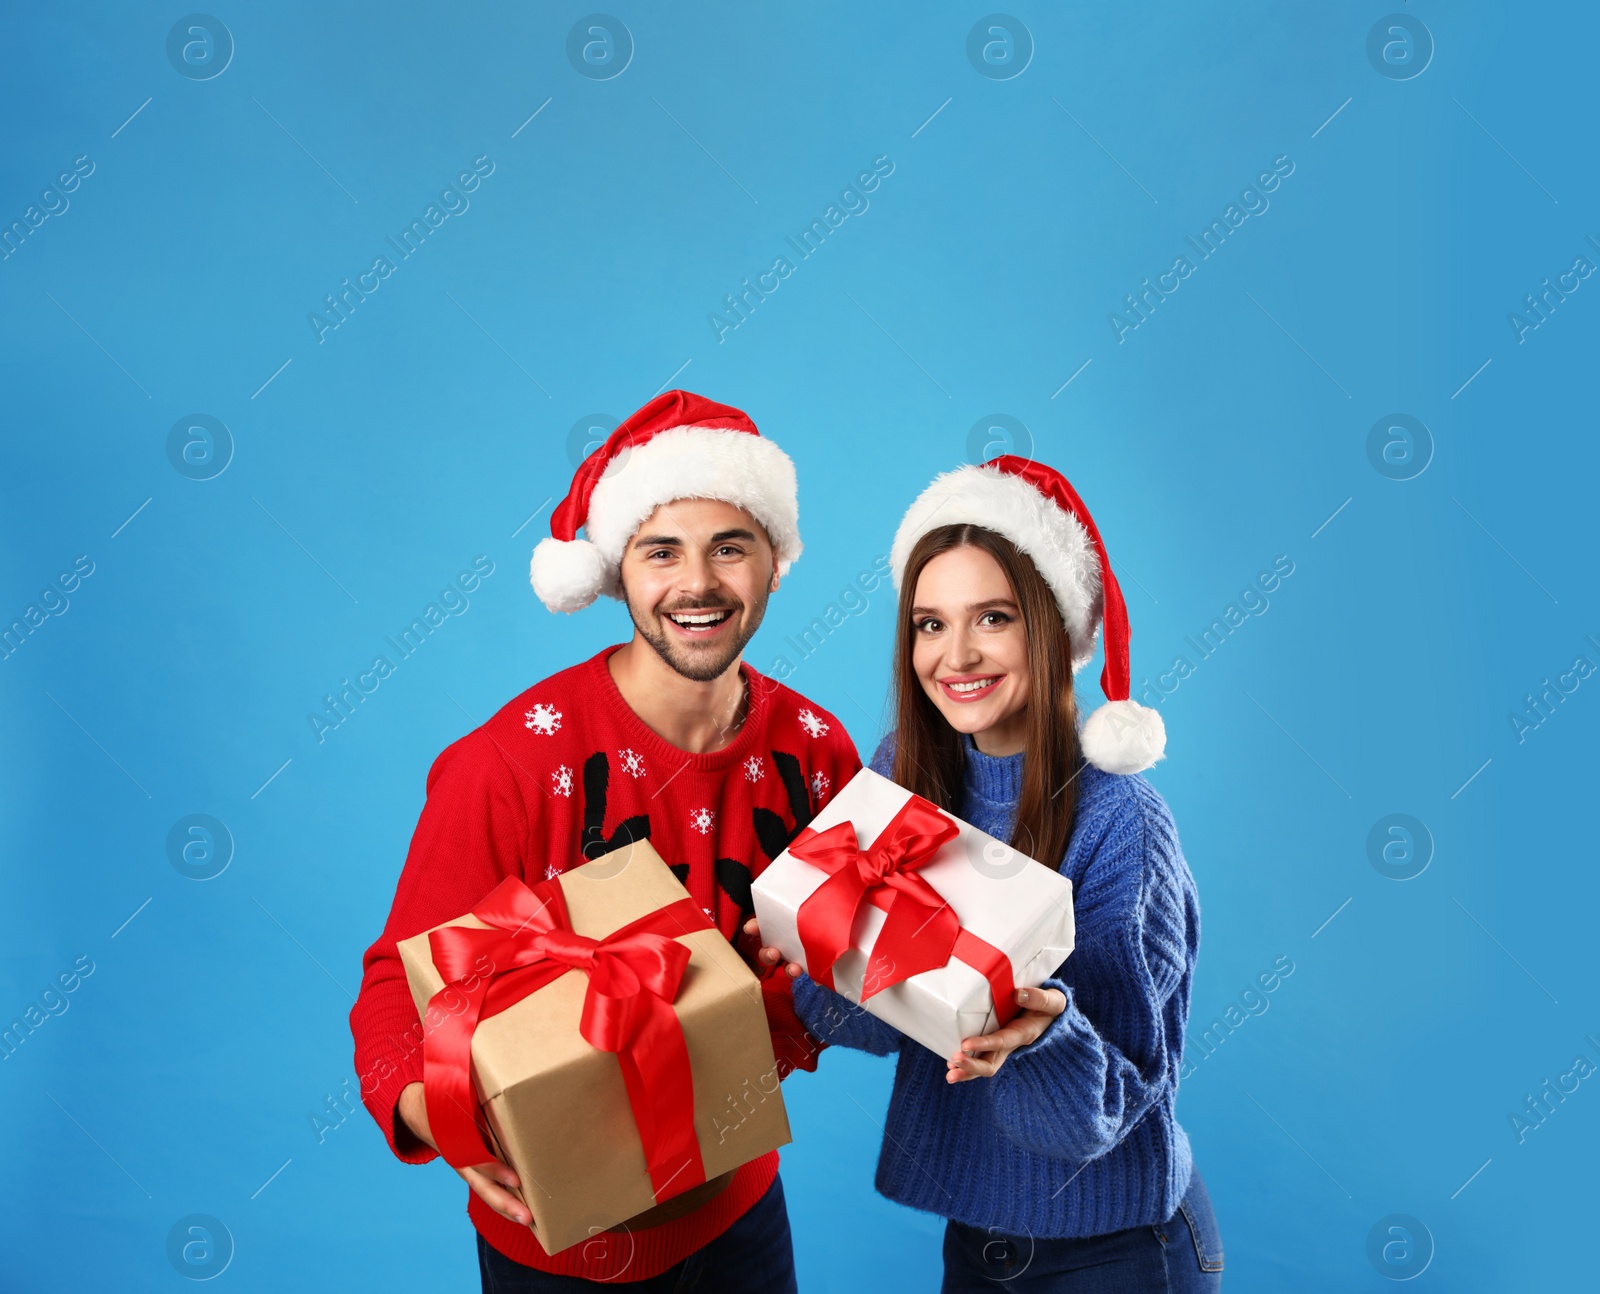 Photo of Couple in Christmas sweaters with Santa hats and gift boxes on blue background